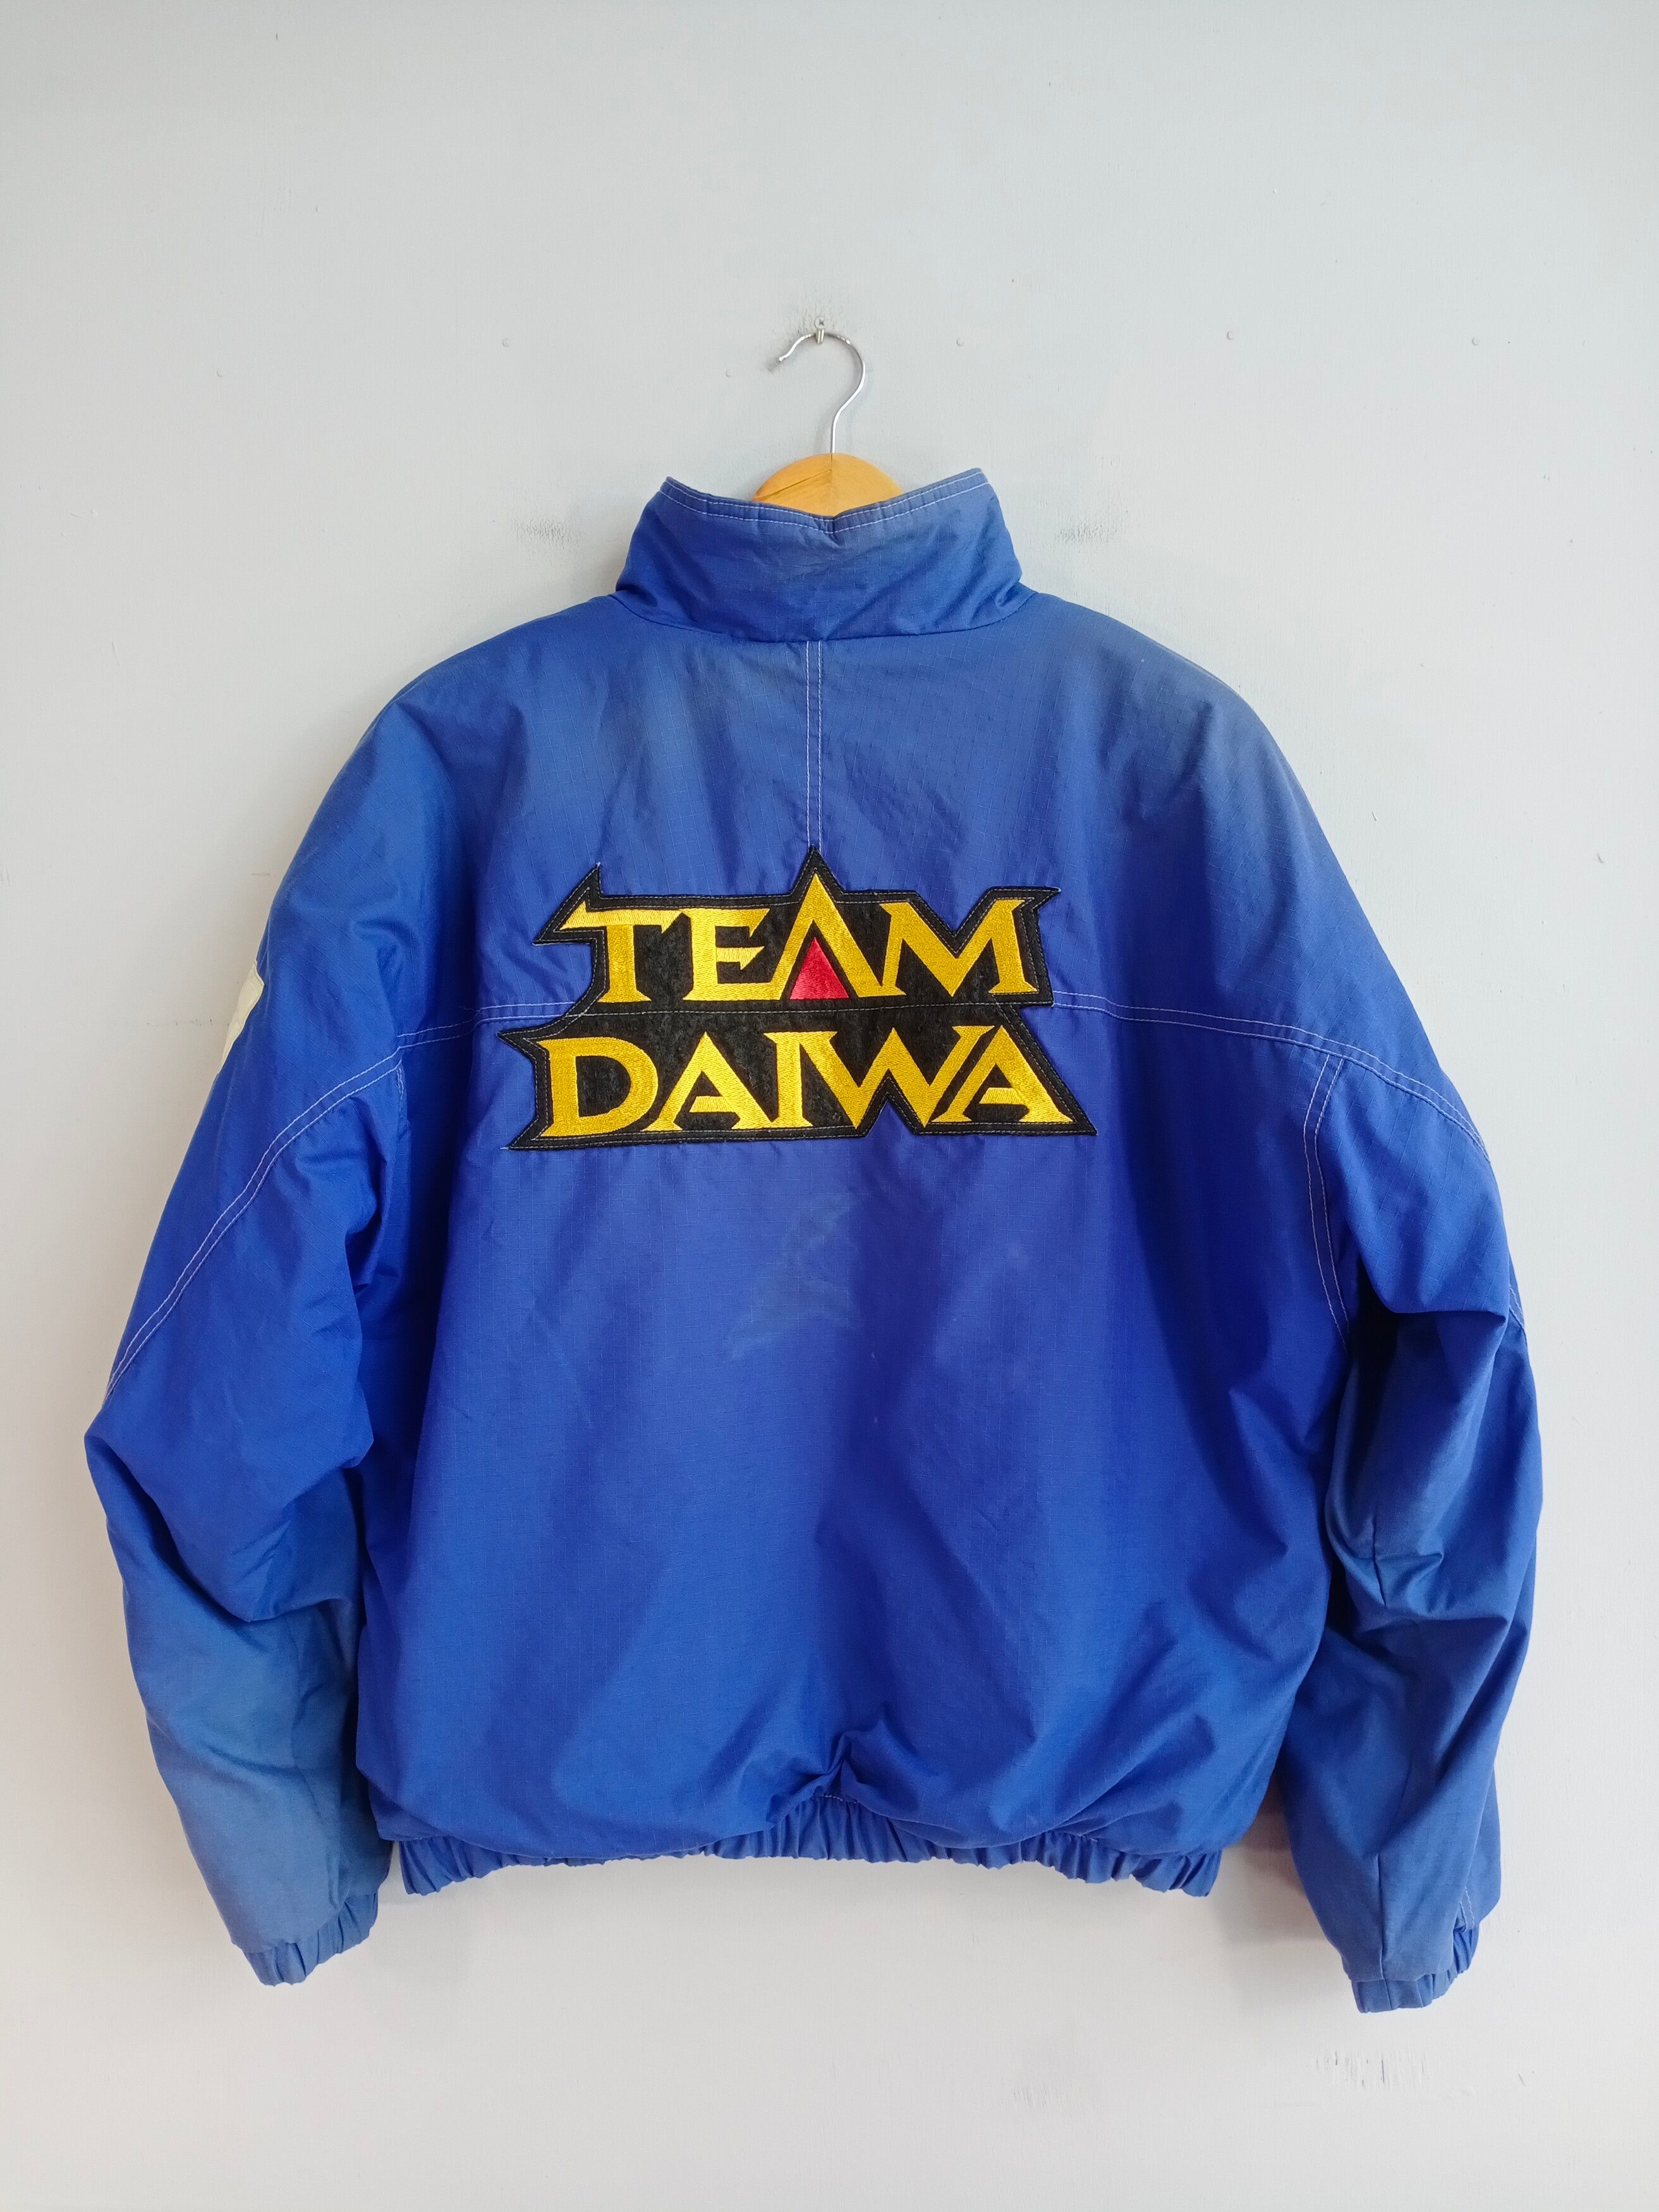 Daiwa Clothing: Curated Shirts, Jeans, Shoes & More